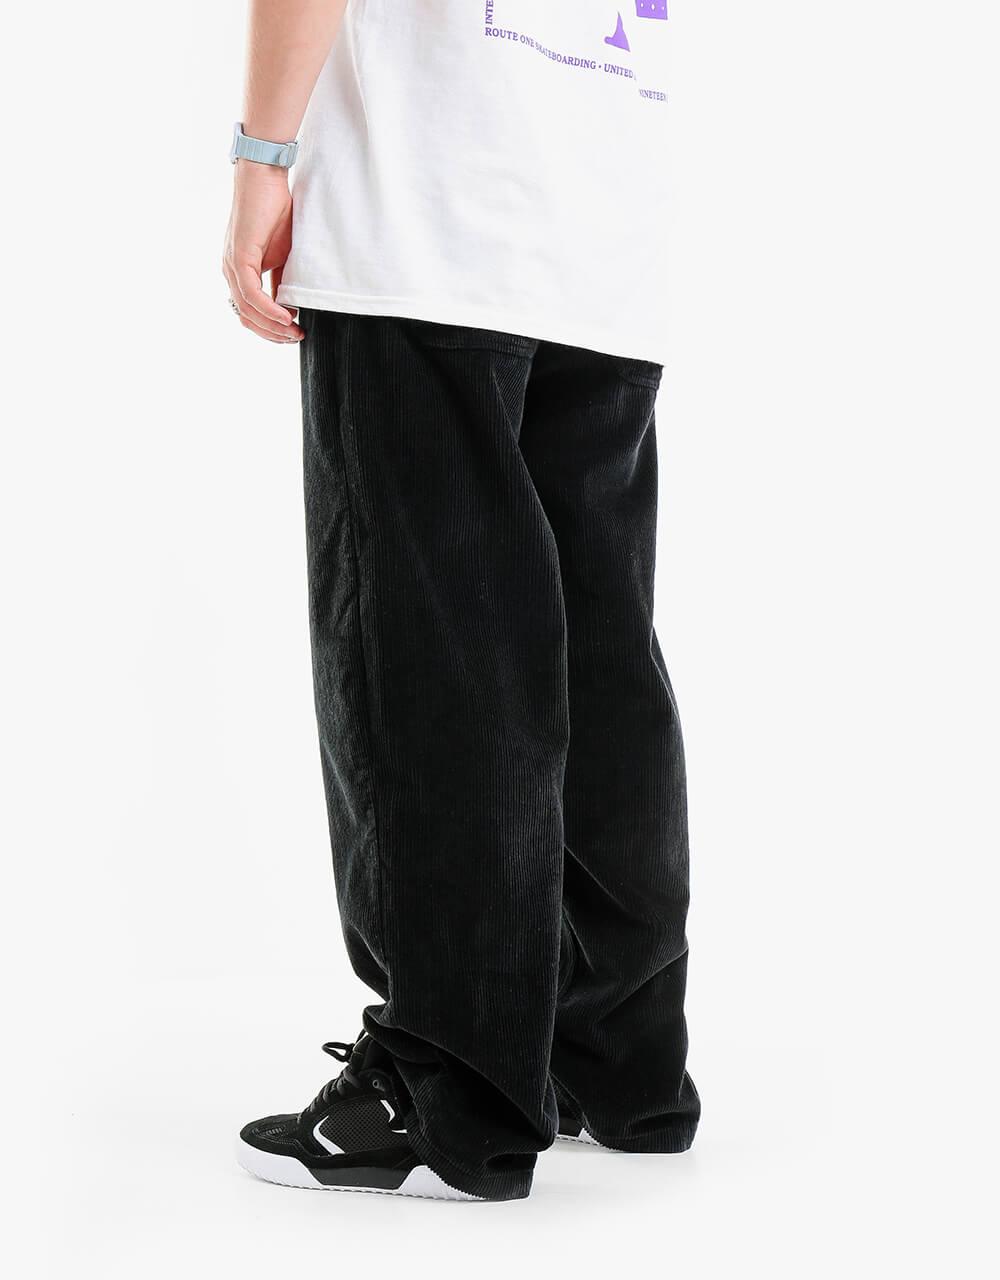 Route One Super Baggy Big Wale Cords - Black